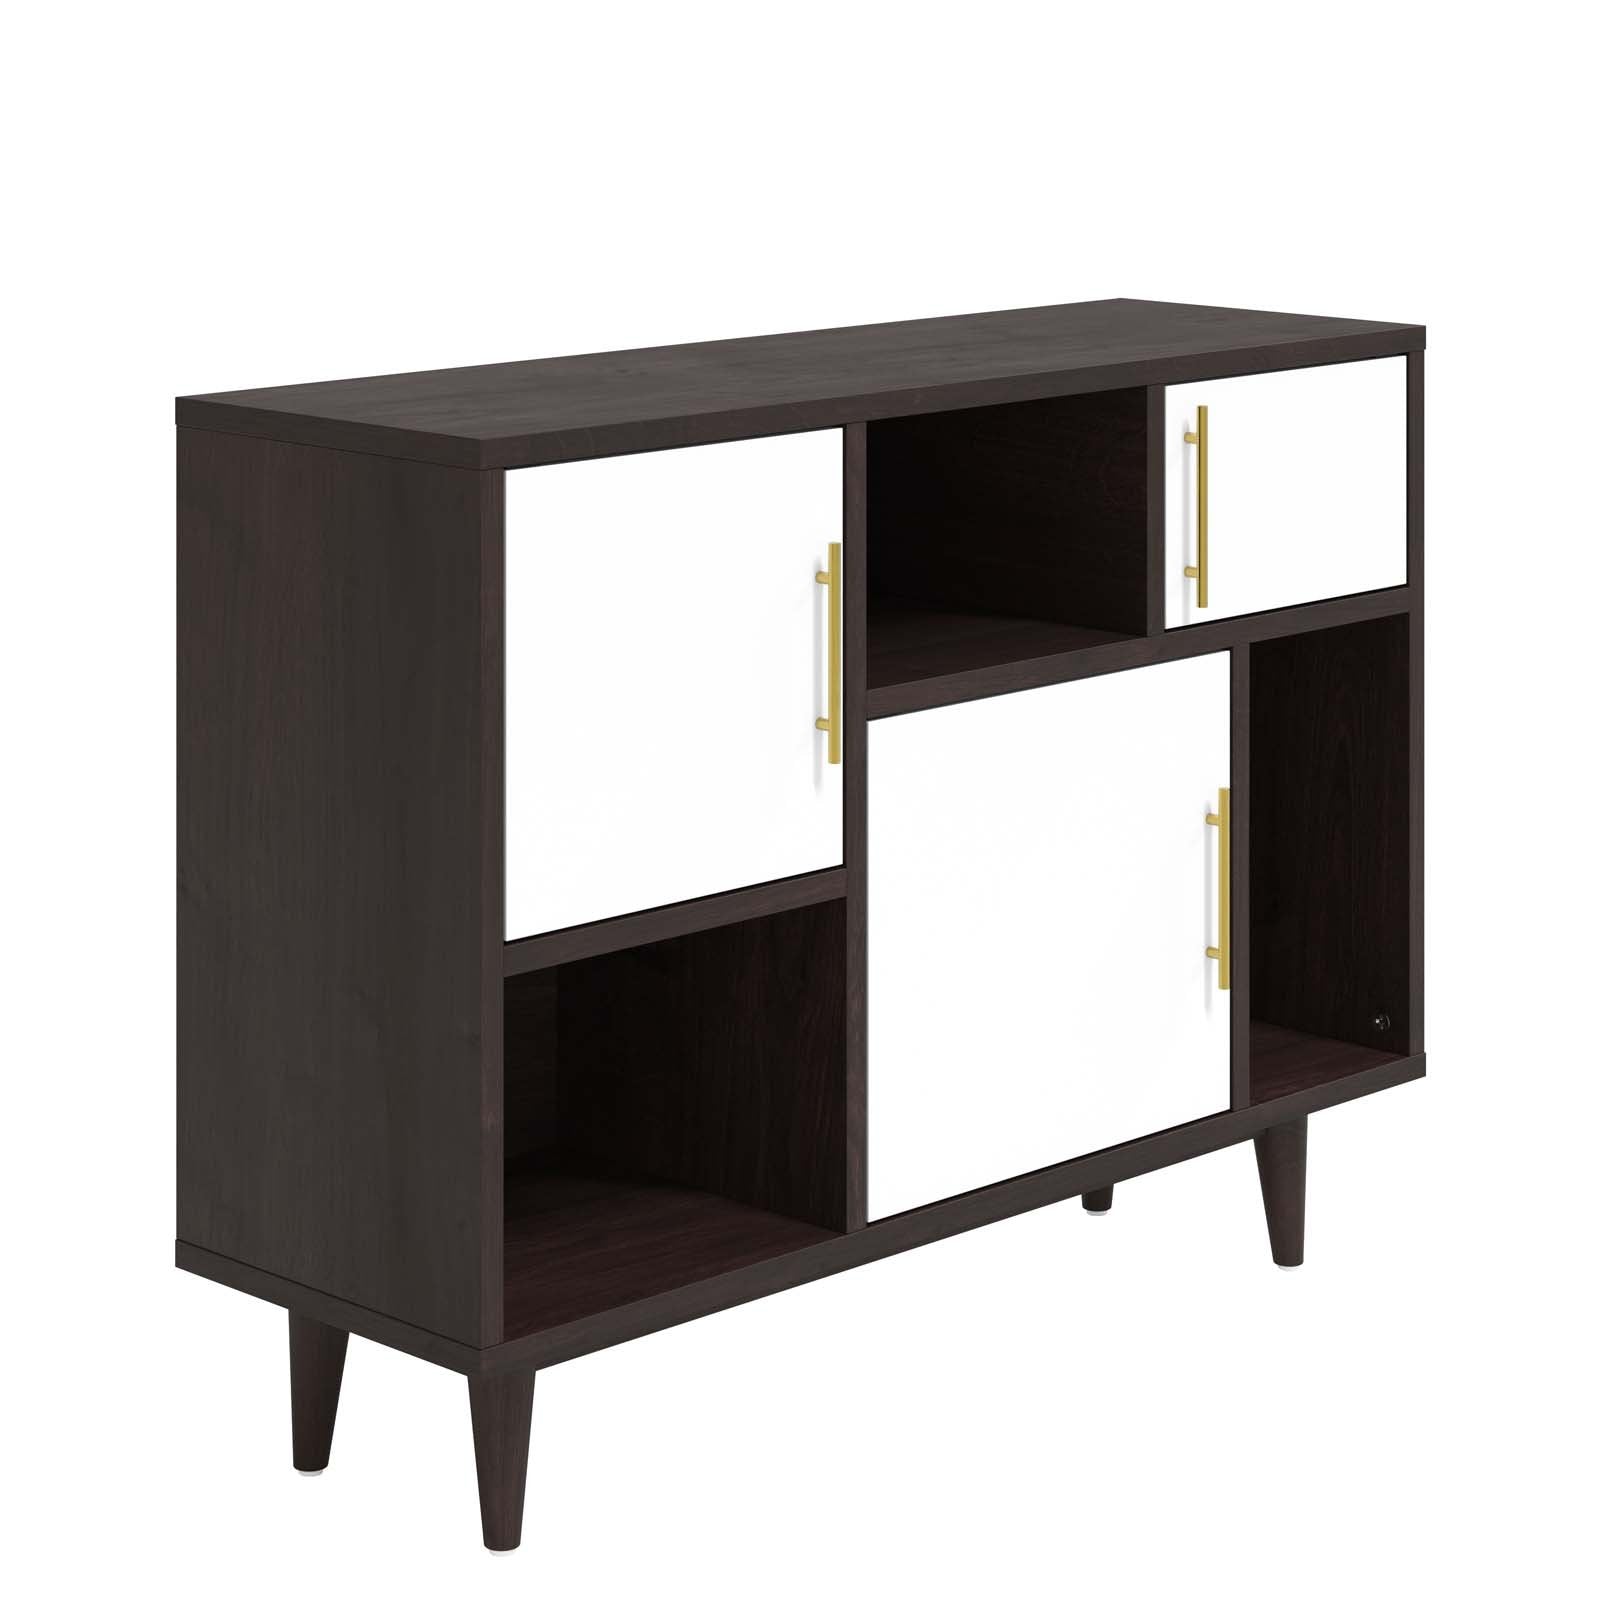 Daxton Display Stand - East Shore Modern Home Furnishings